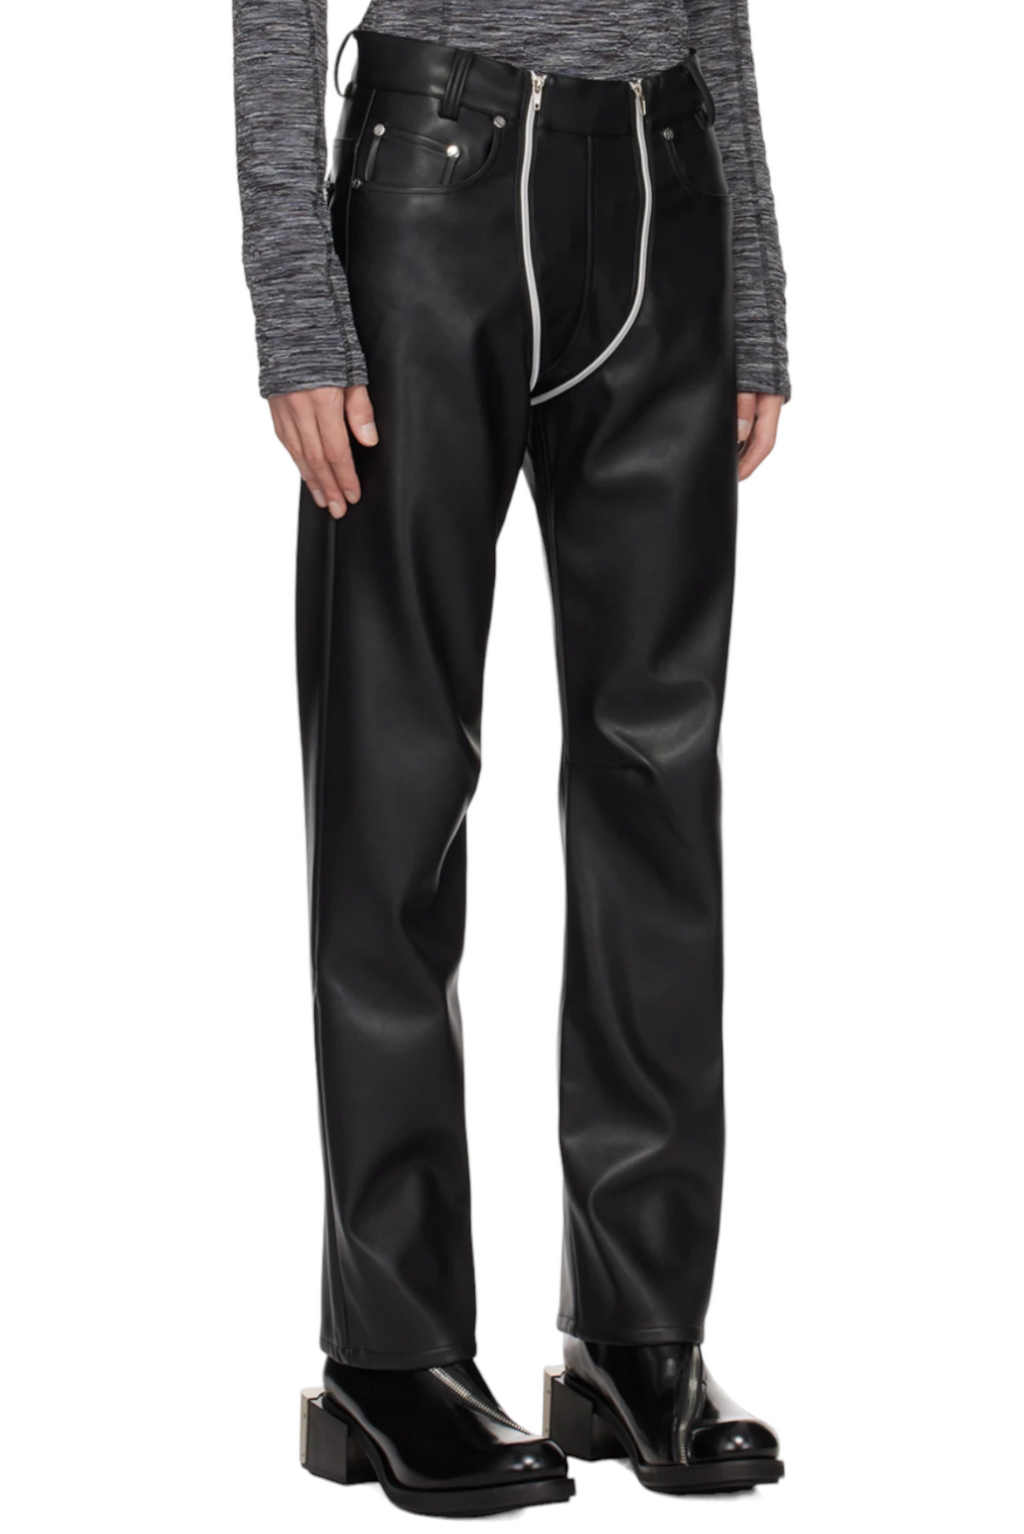 GmbH Lata Trousers With Double Zip